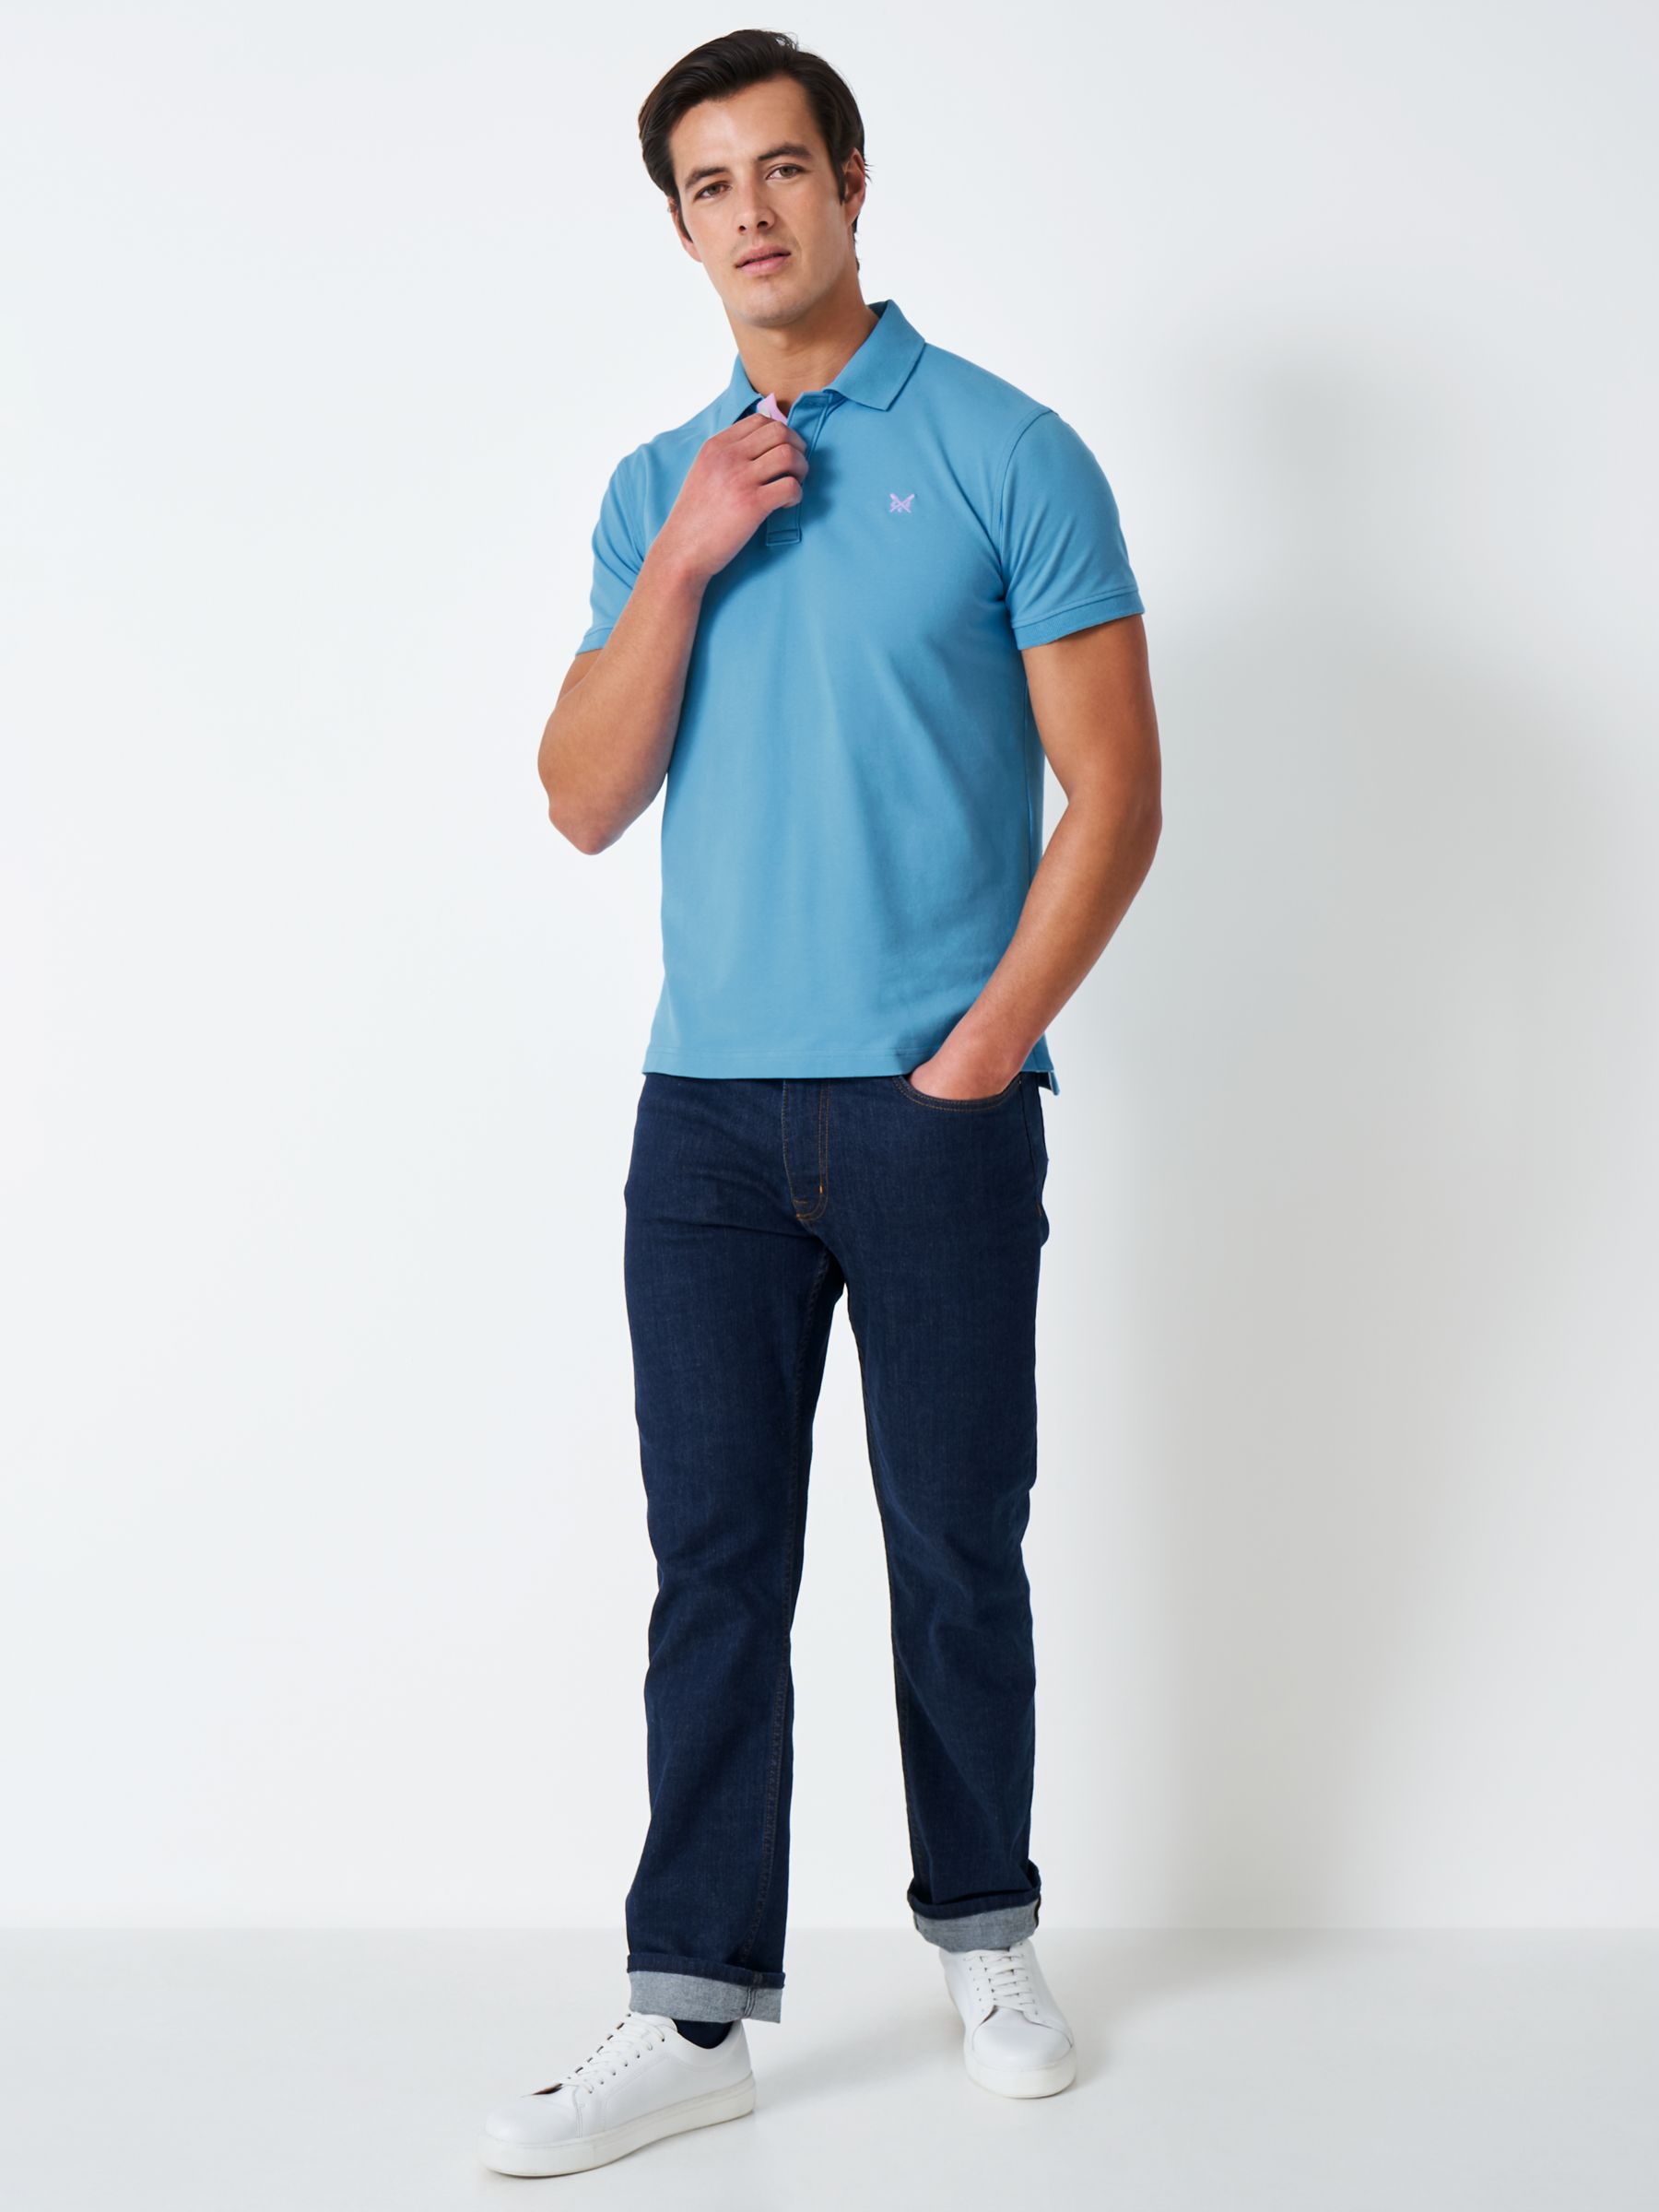 Crew Clothing Piqué Short Sleeve Bright Lewis Blue Top, at Partners Polo & John